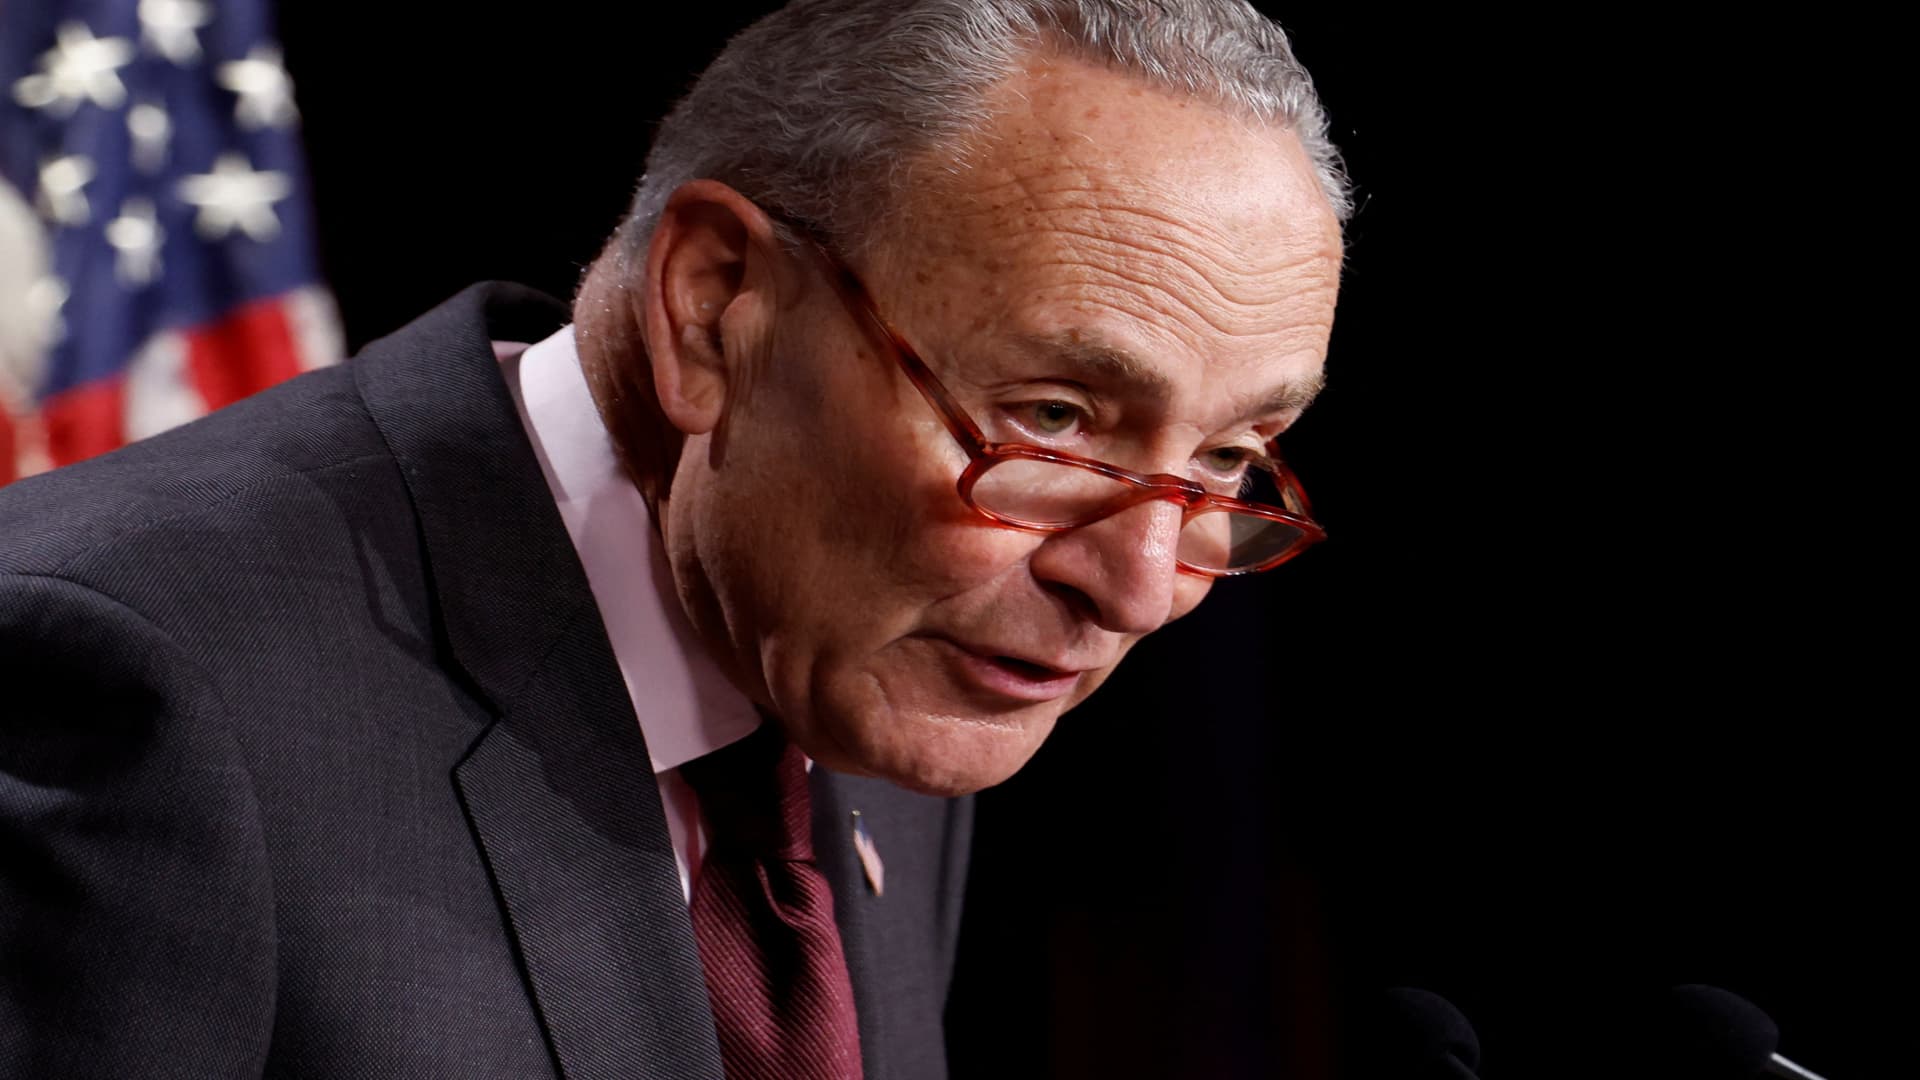 U.S. Senate Majority Leader Chuck Schumer (D-NY) holds a news conference to tout the $430 billion drug pricing, energy and tax bill championed by Democrats at the U.S. Capitol in Washington, U.S. August 5, 2022. 